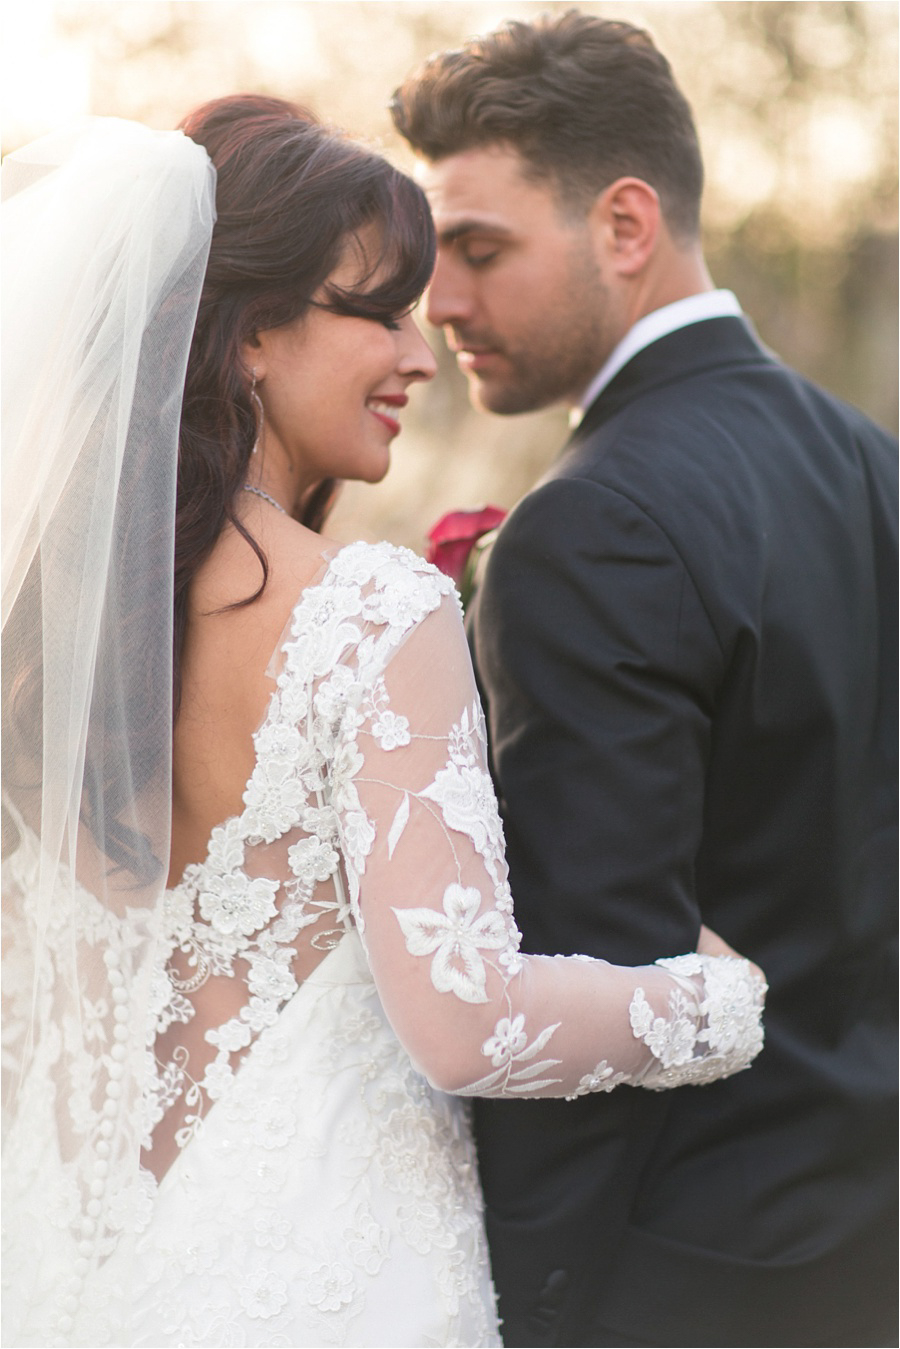 Old Tappen Manor Wedding - Amy Rizzuto Photography-7